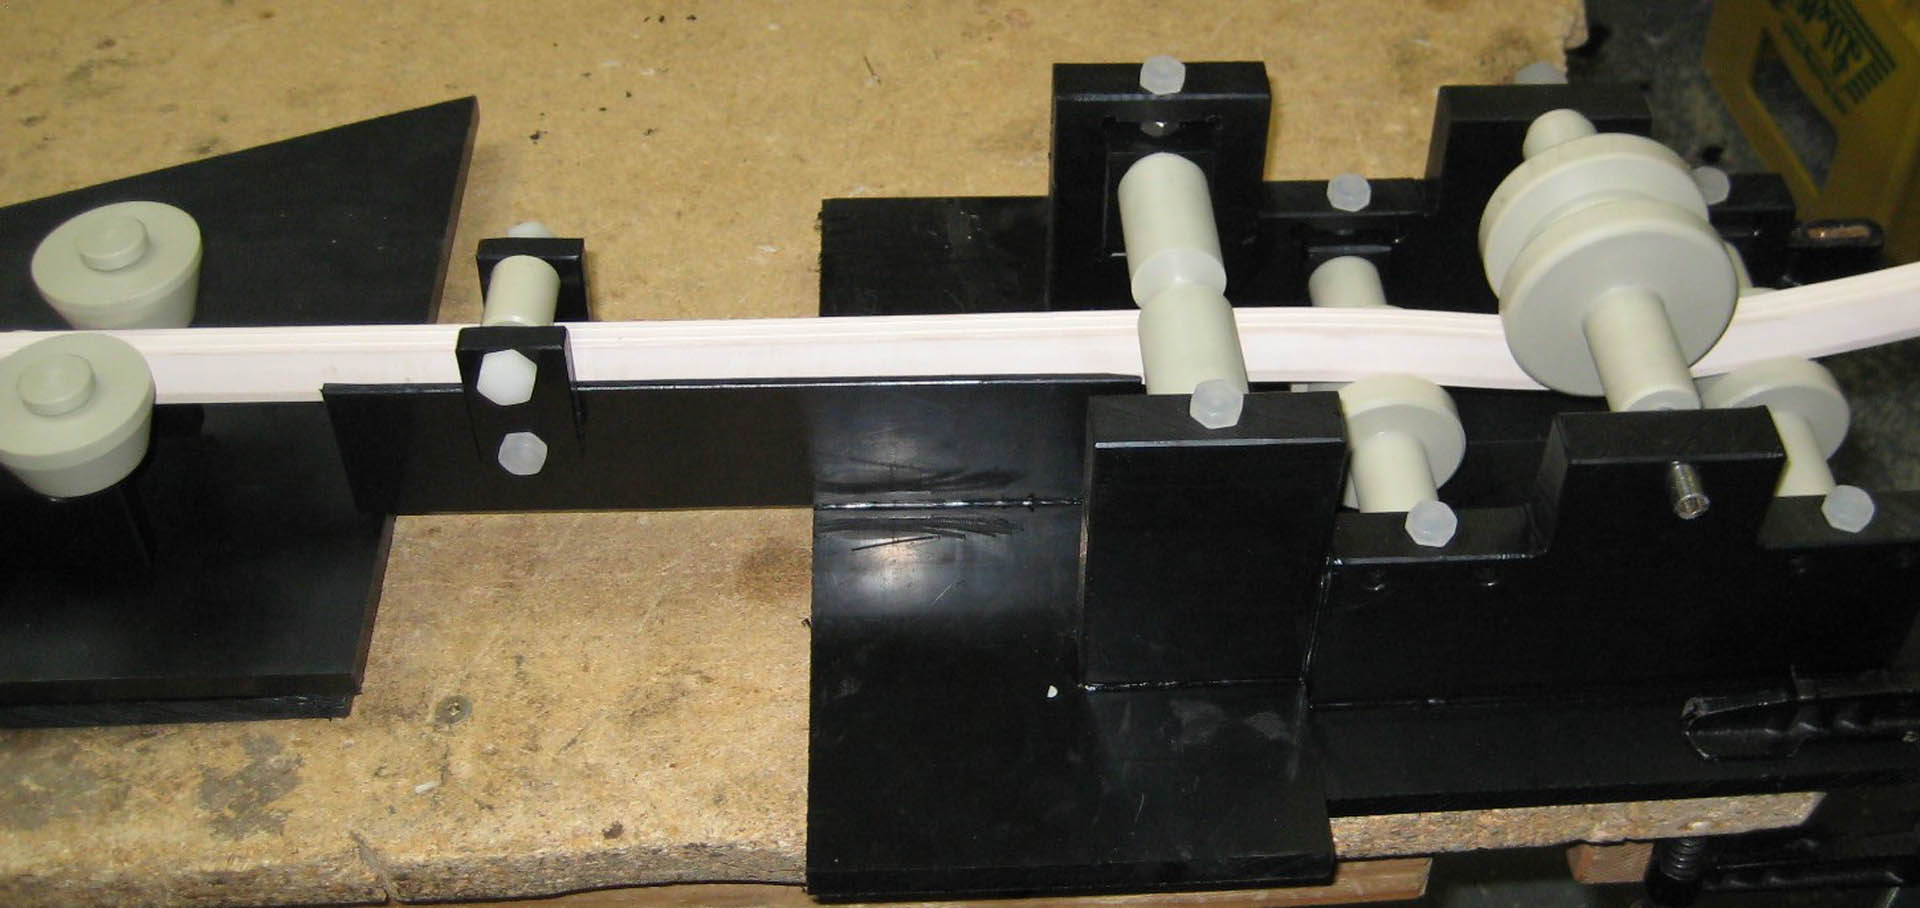 Prototype thermoplastic system for acid